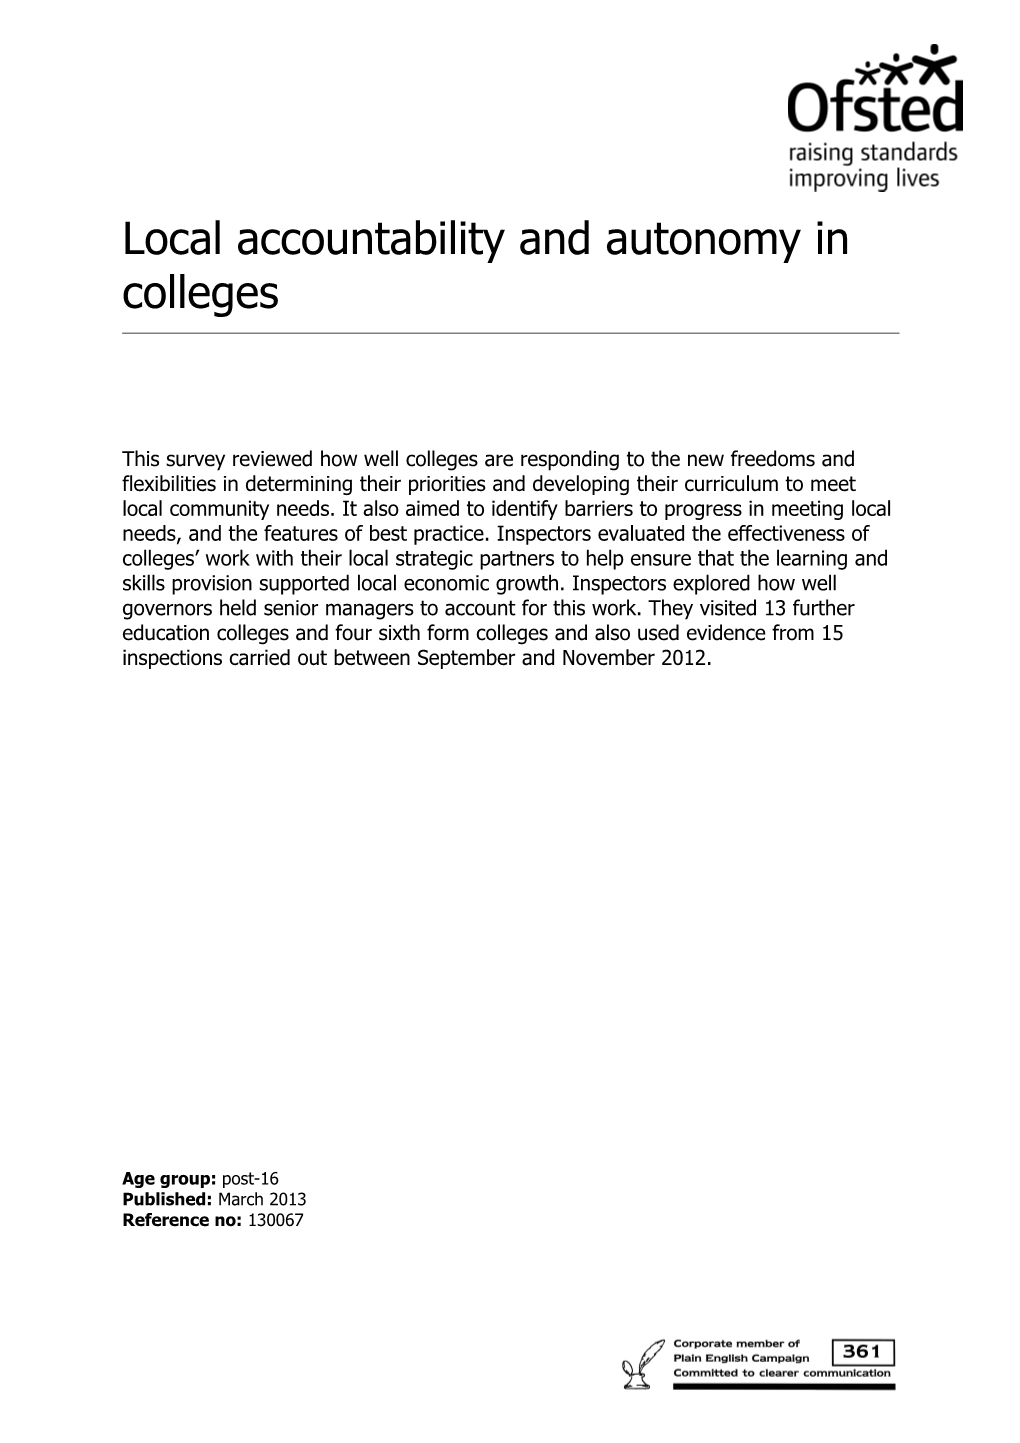 Local Accountability and Autonomy in Colleges